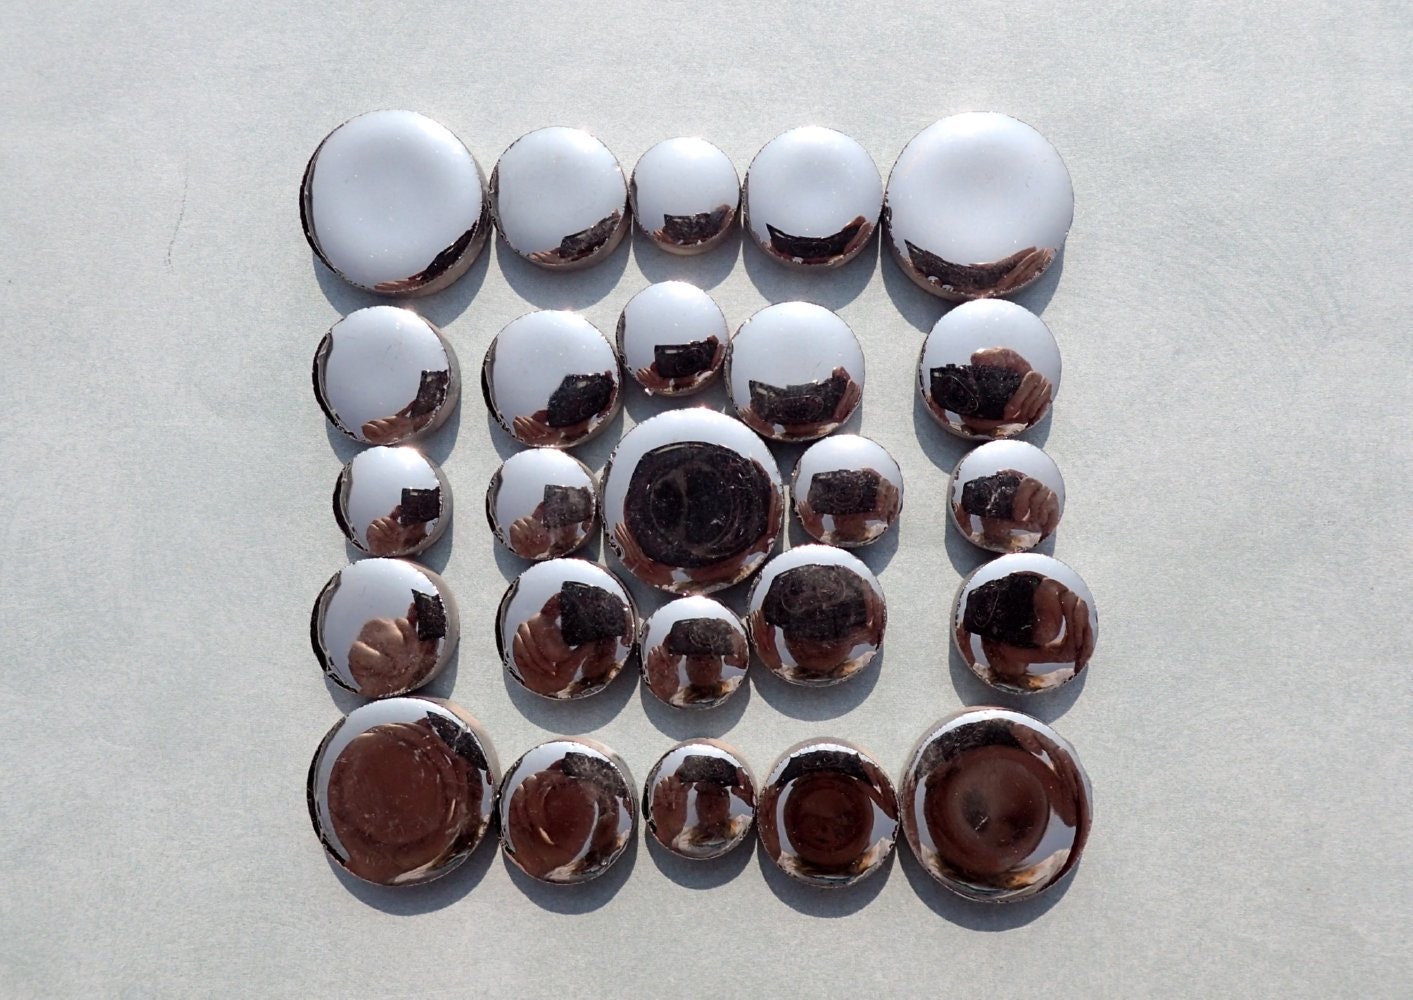 Silver Circles Mosaic Tiles - 50g Ceramic in Mix of 3 Sizes 1/2" and 3/4" and 5/8" Metallic